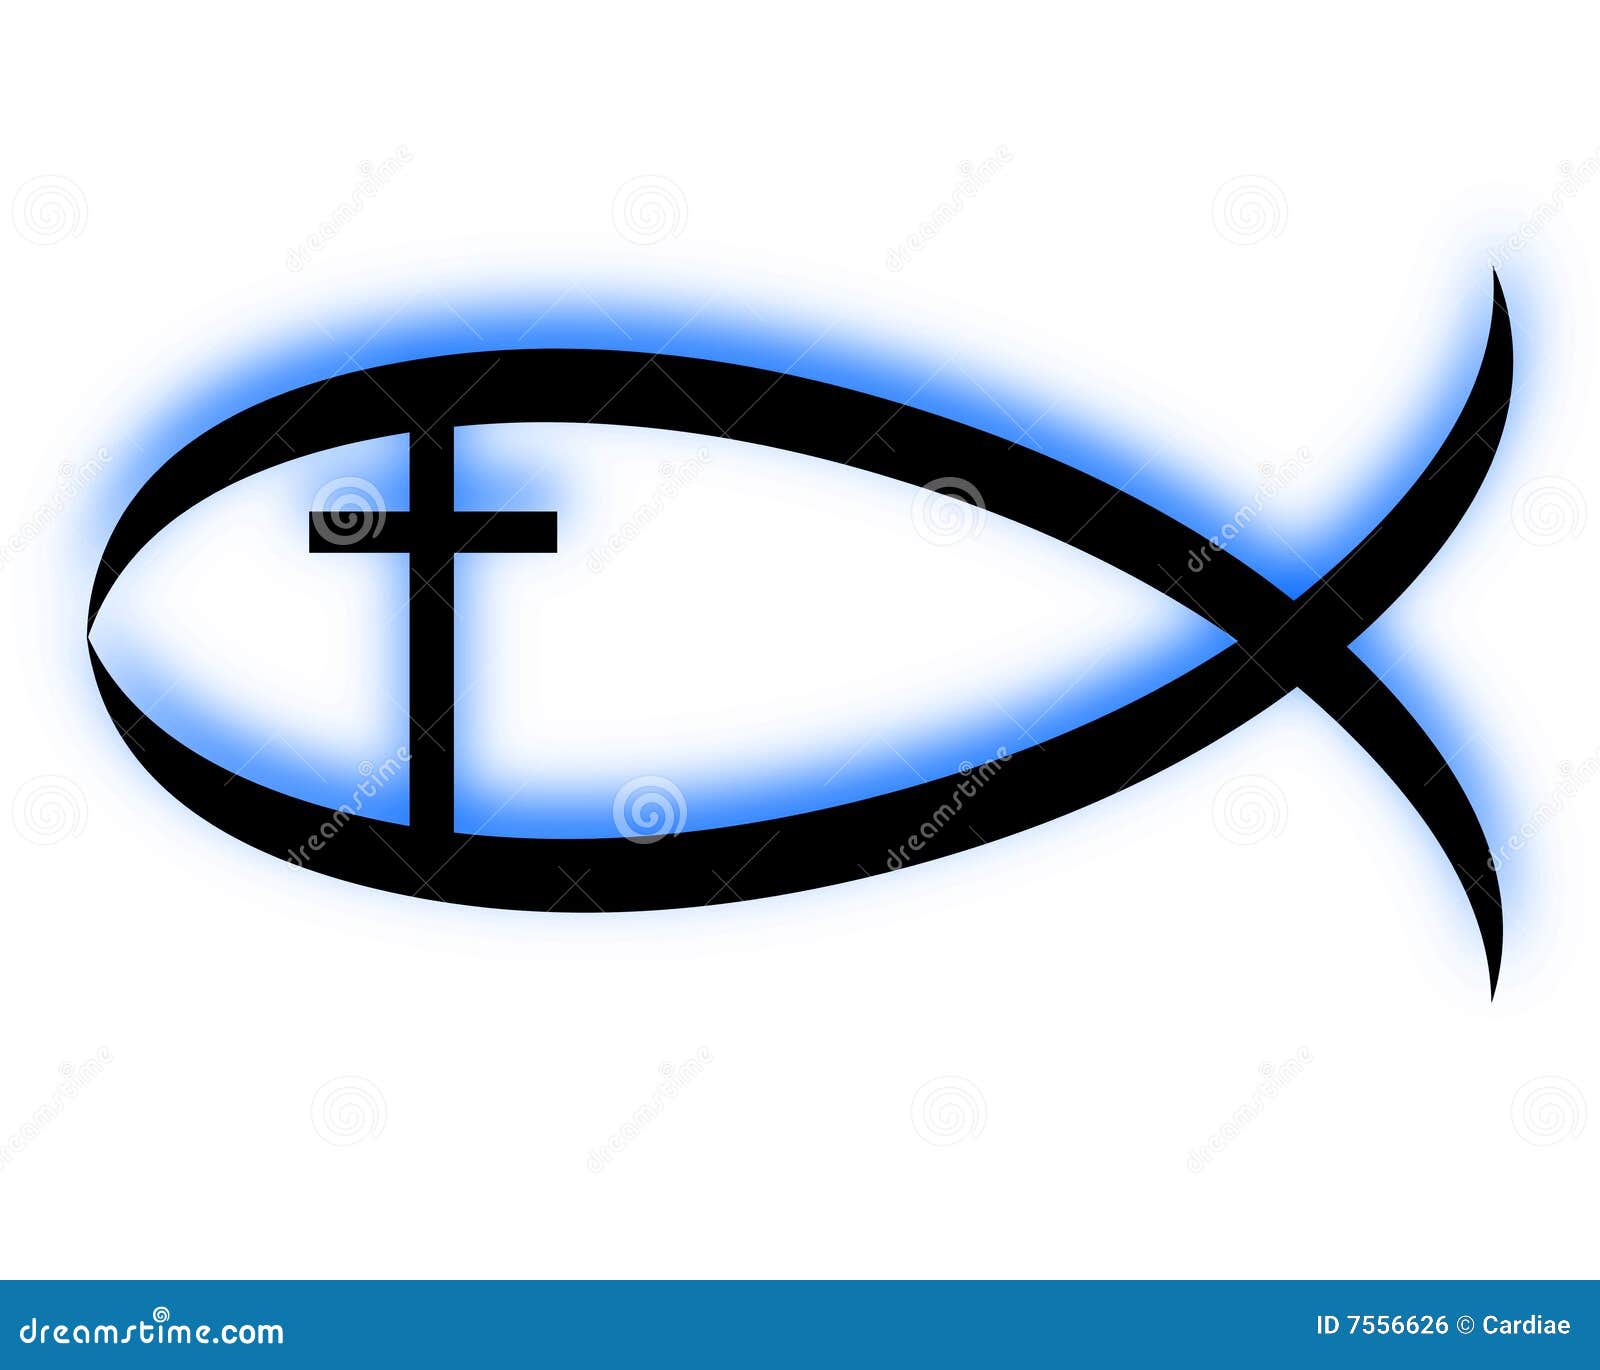 christian fish clipart free download - photo #40